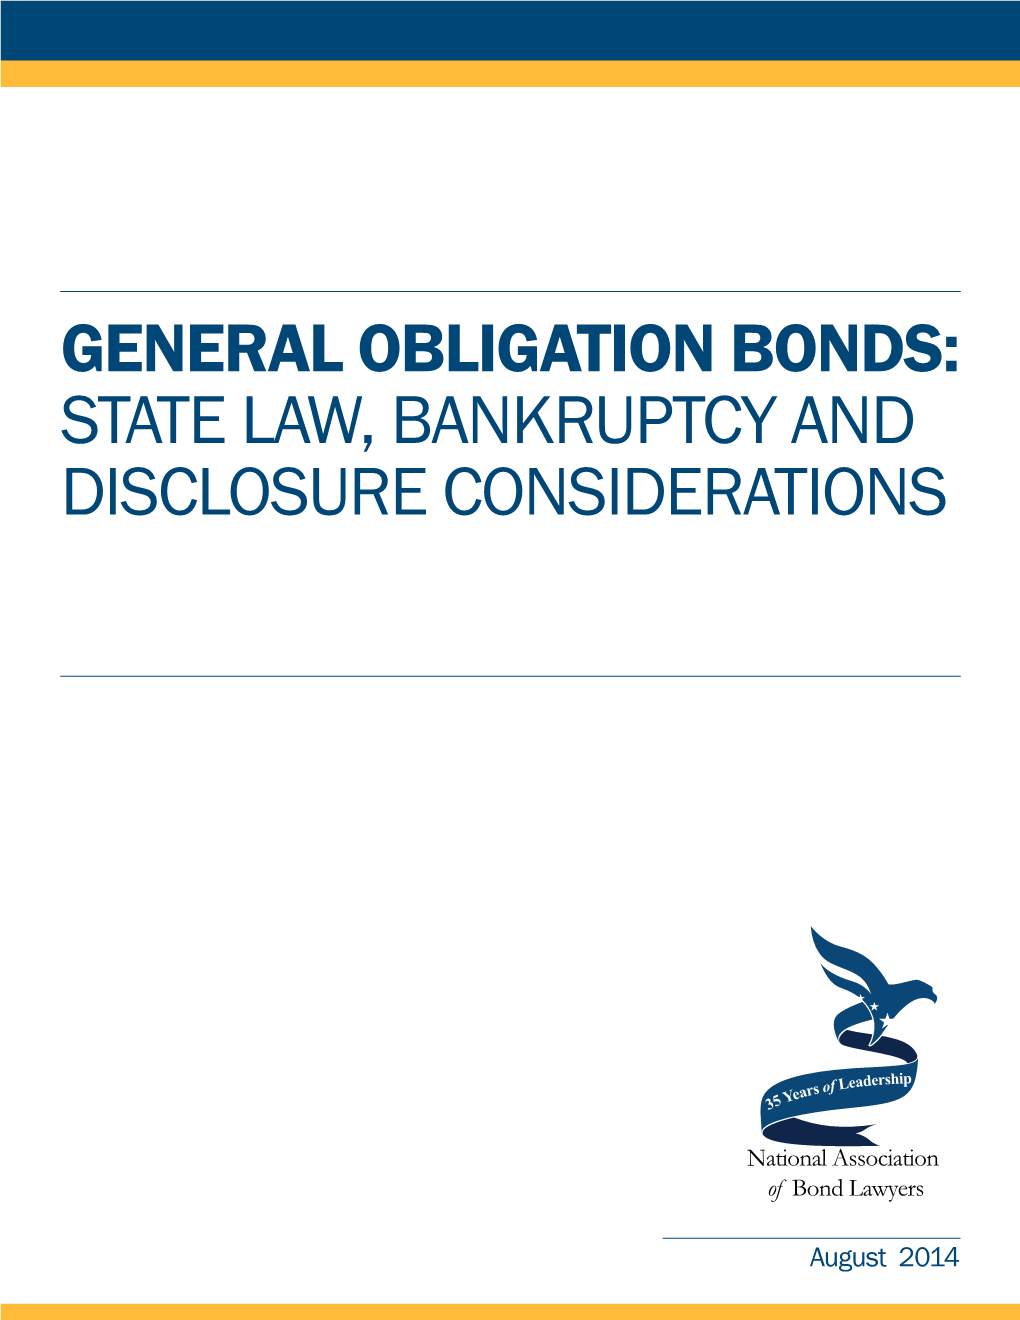 General Obligation Bonds: State Law, Bankruptcy and Disclosure Considerations